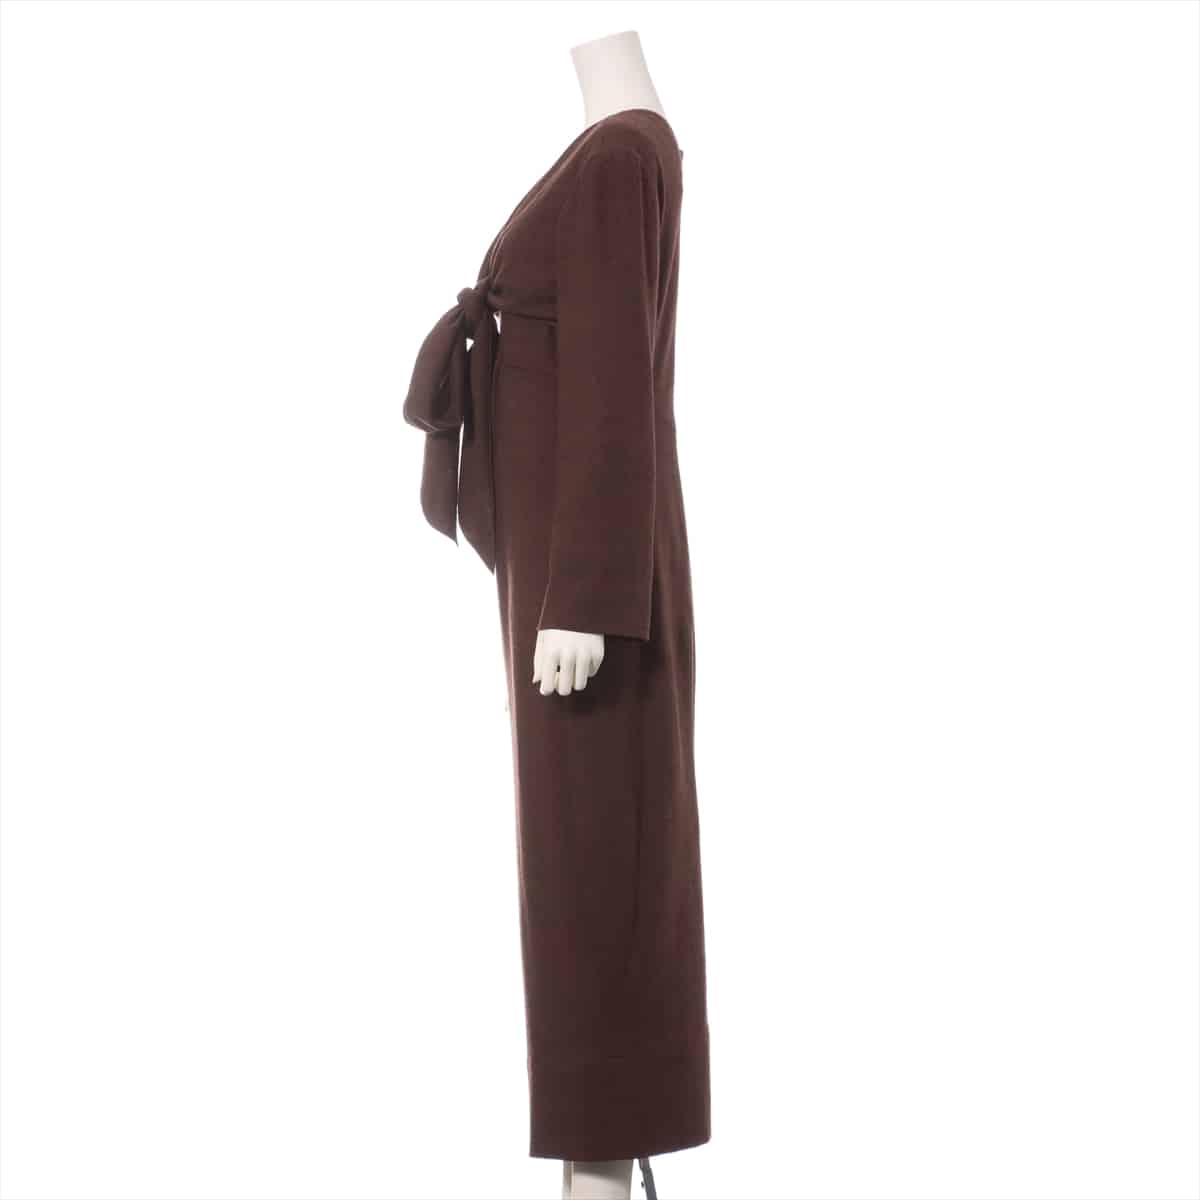 Chanel Coco Button 98A Wool Dress 38 Ladies' Brown  There are armpit stains